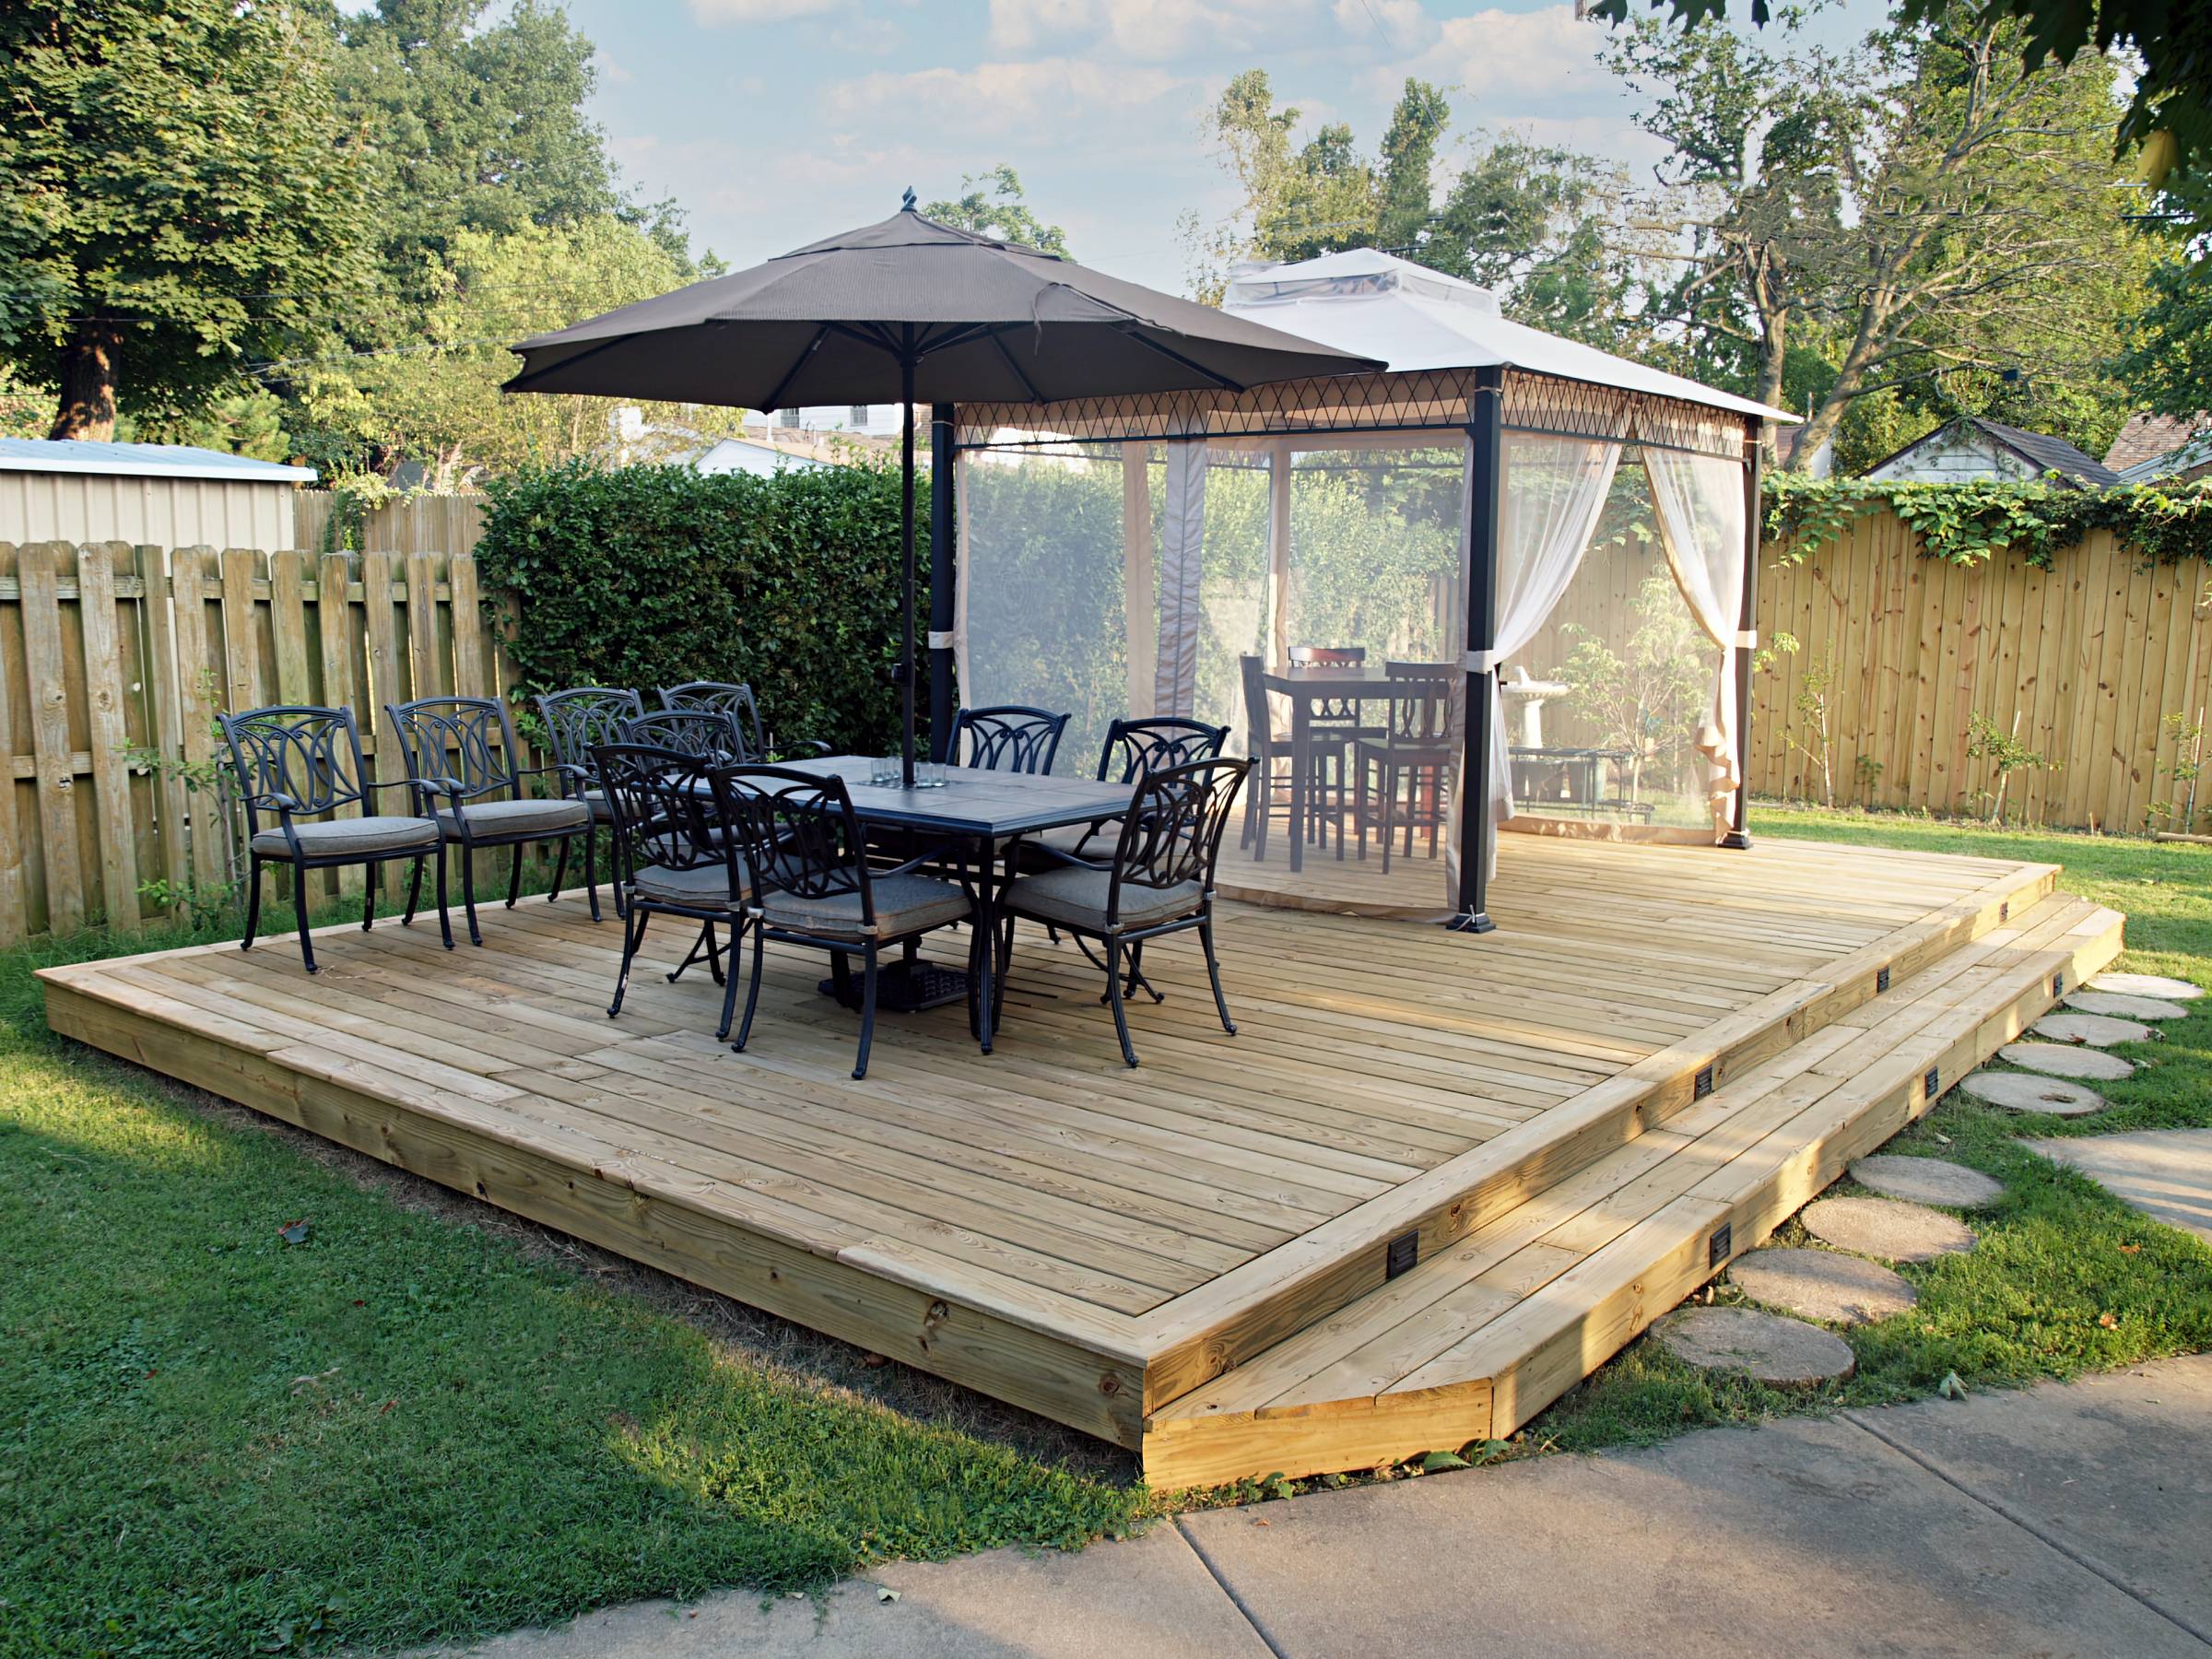 a wooden deck with shaded seating areas